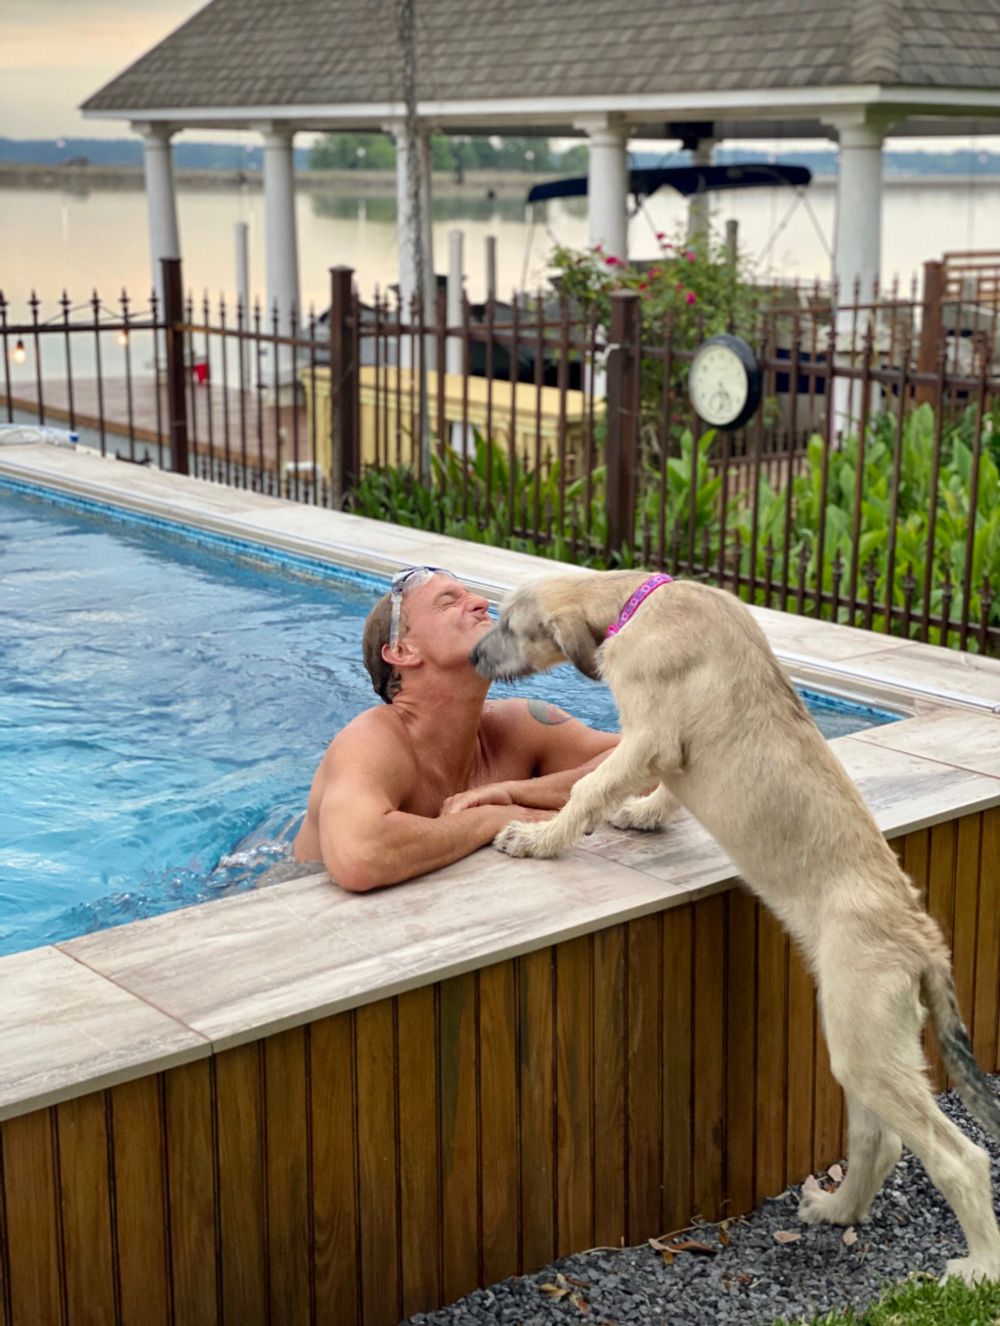 A picture of a man standing at the edge of an outdoor pool, leaning up to let his dog lick him.